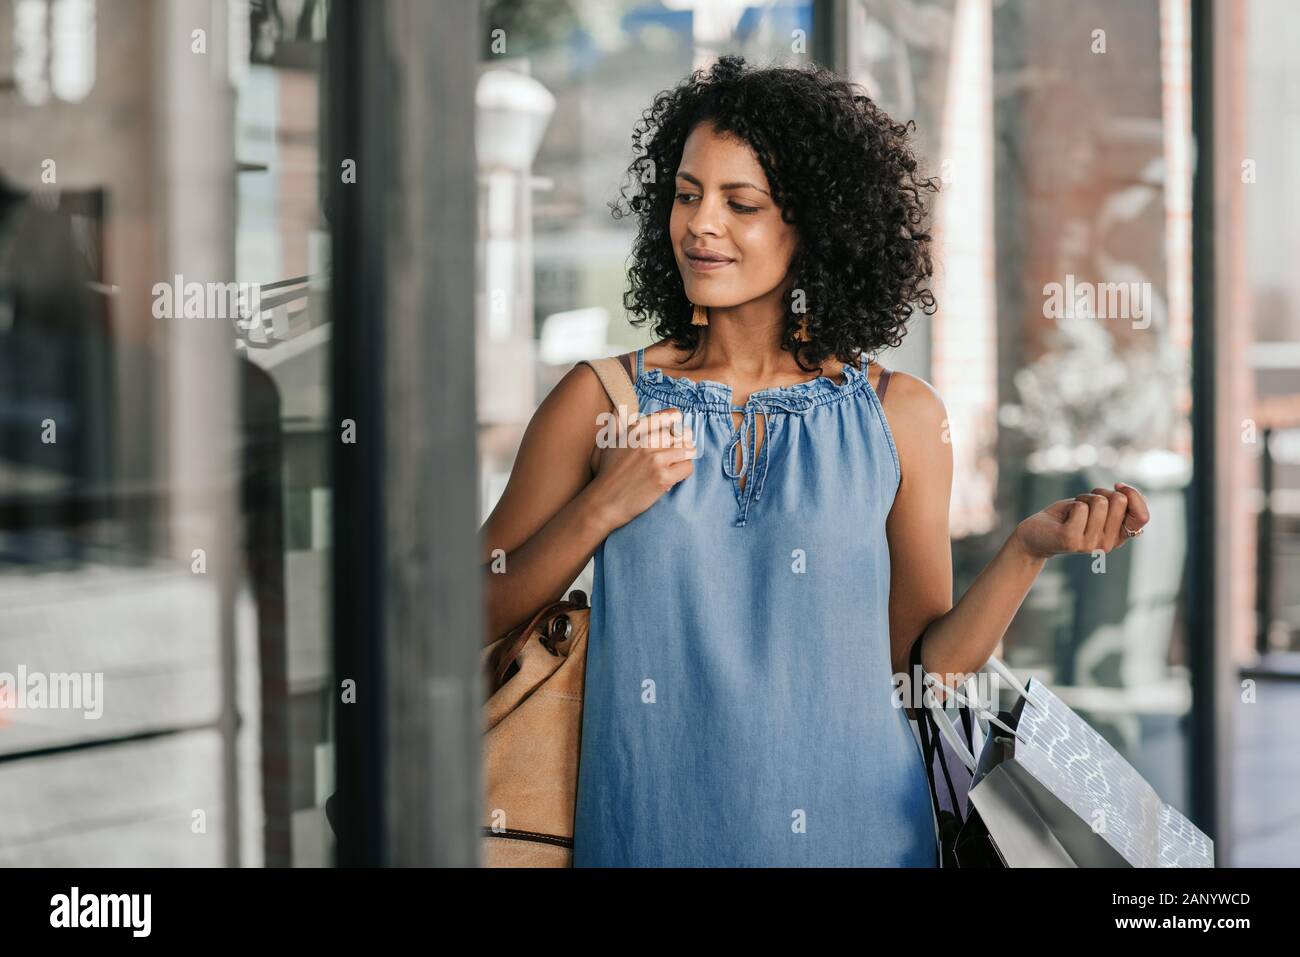 Stylish young woman smiling while out shopping for clothes Stock Photo